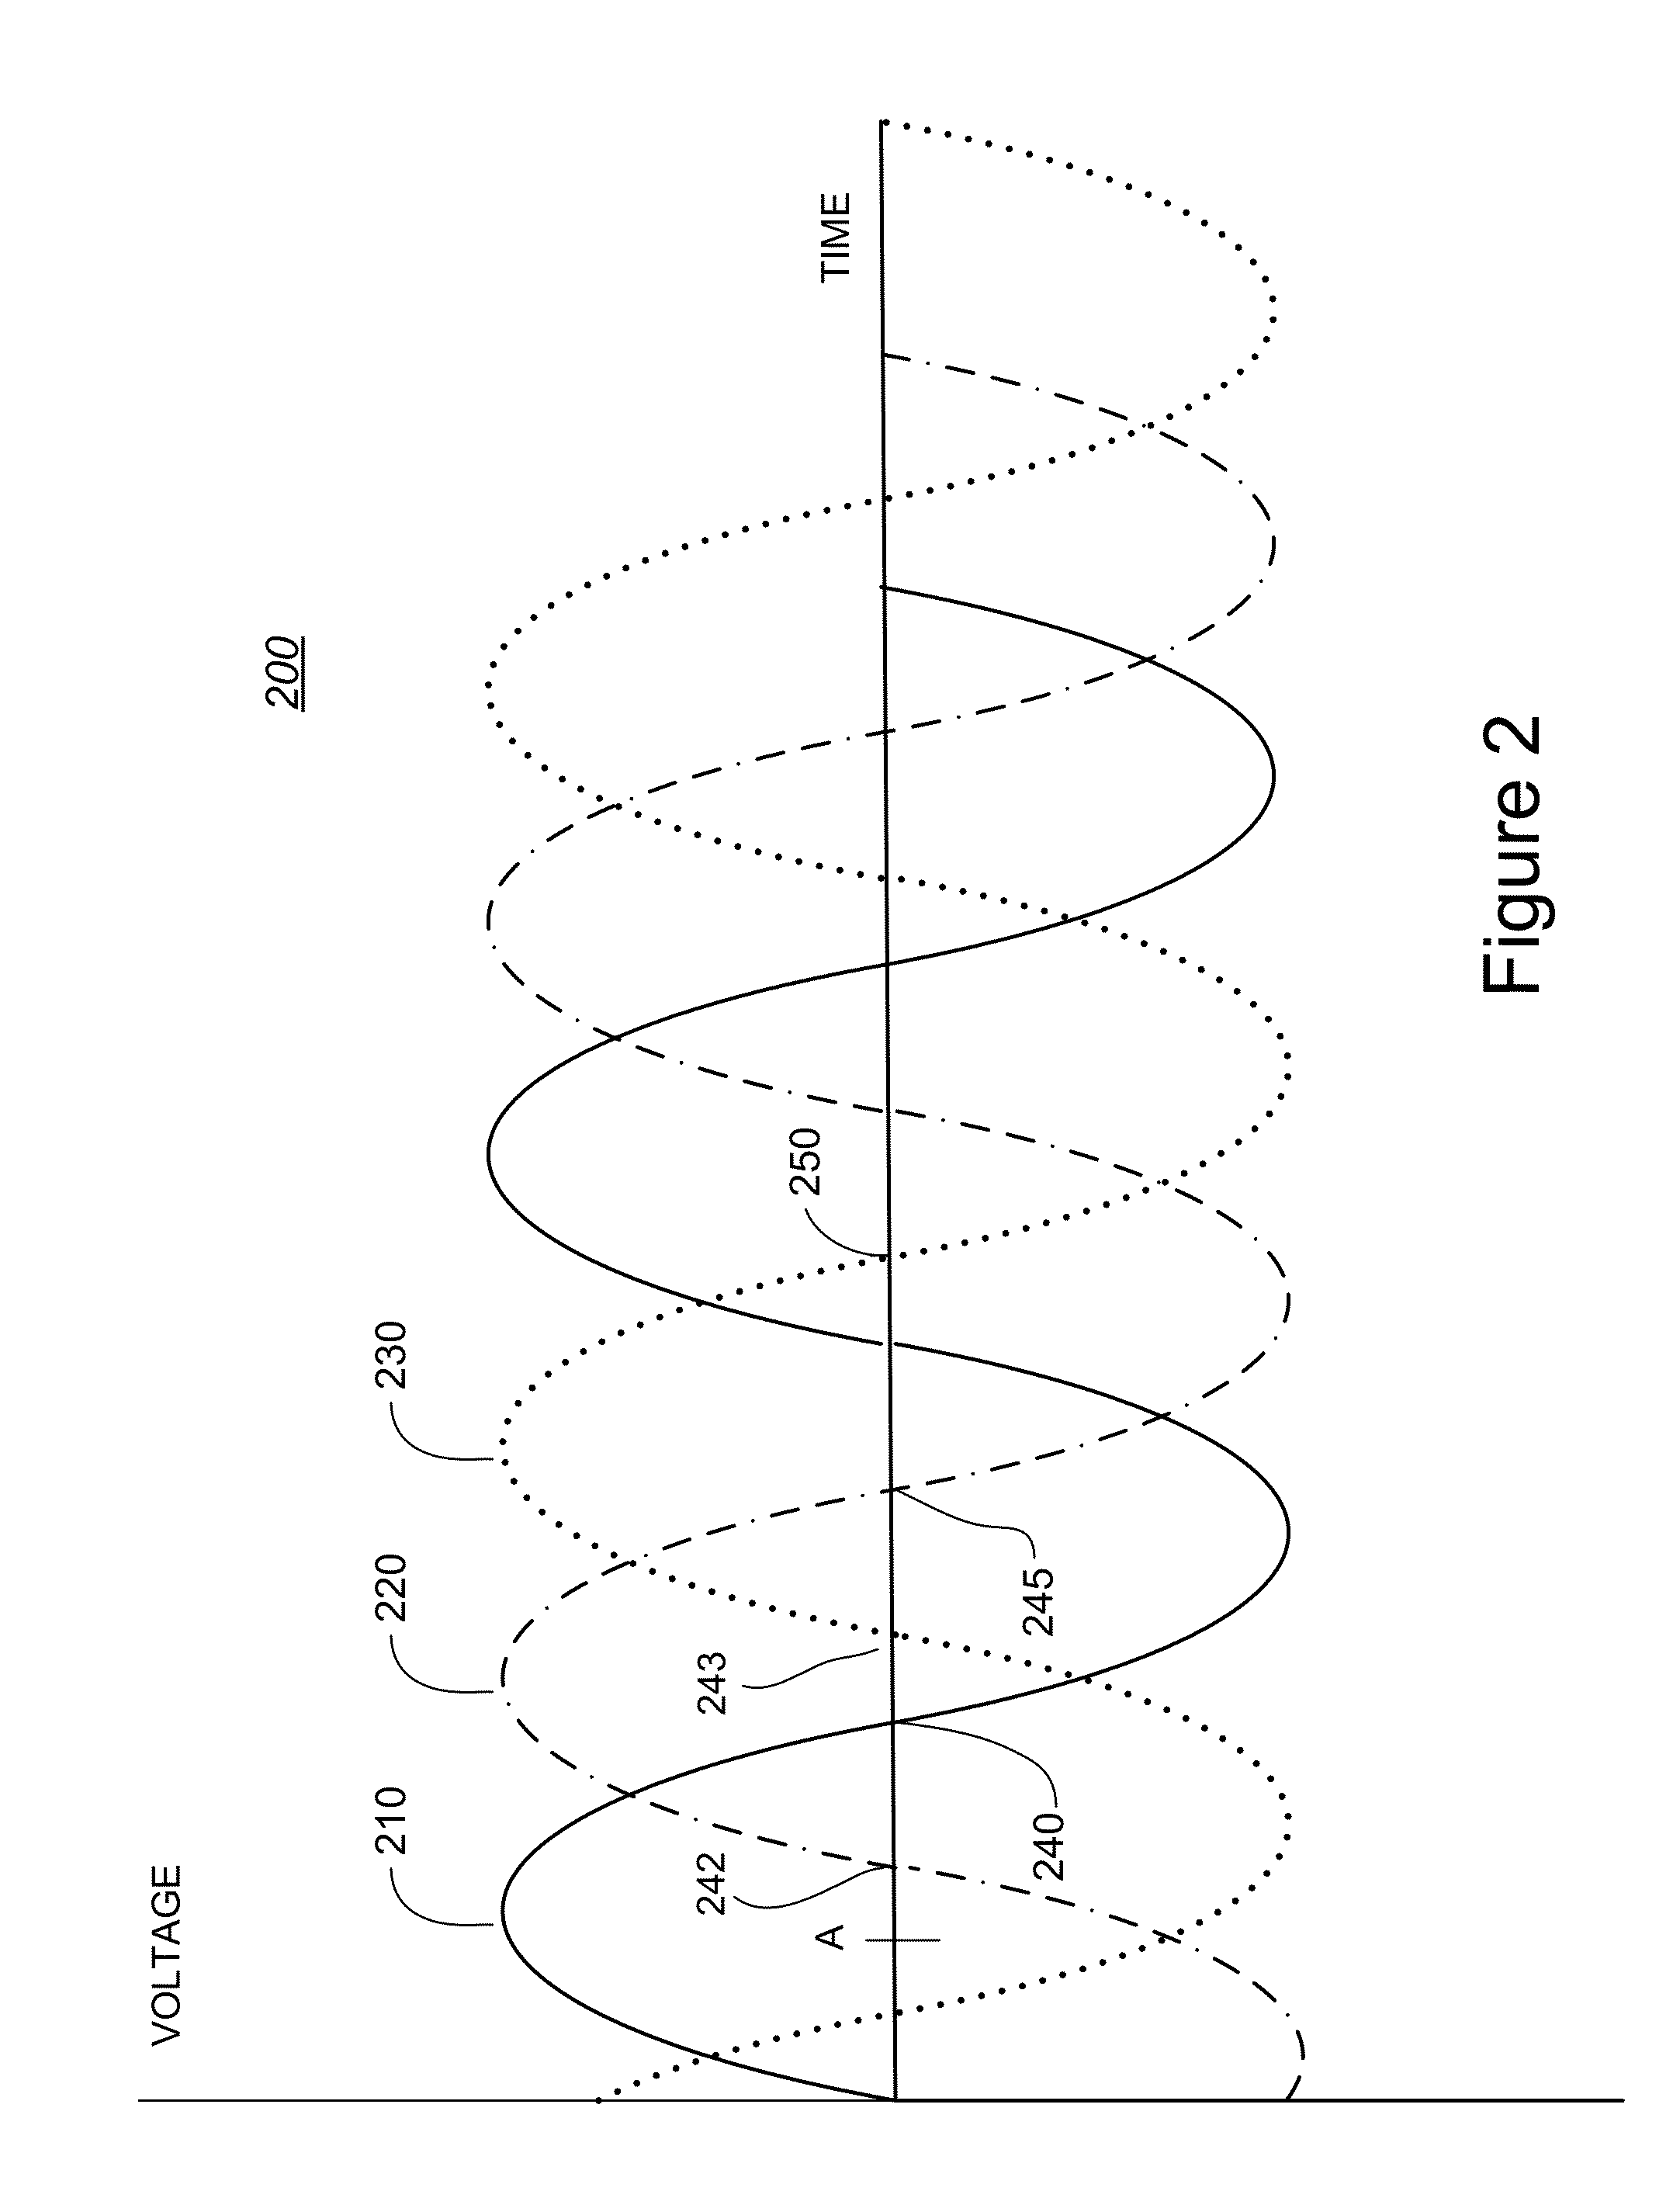 System, Method and Computer Program Product for Determining Load Profiles